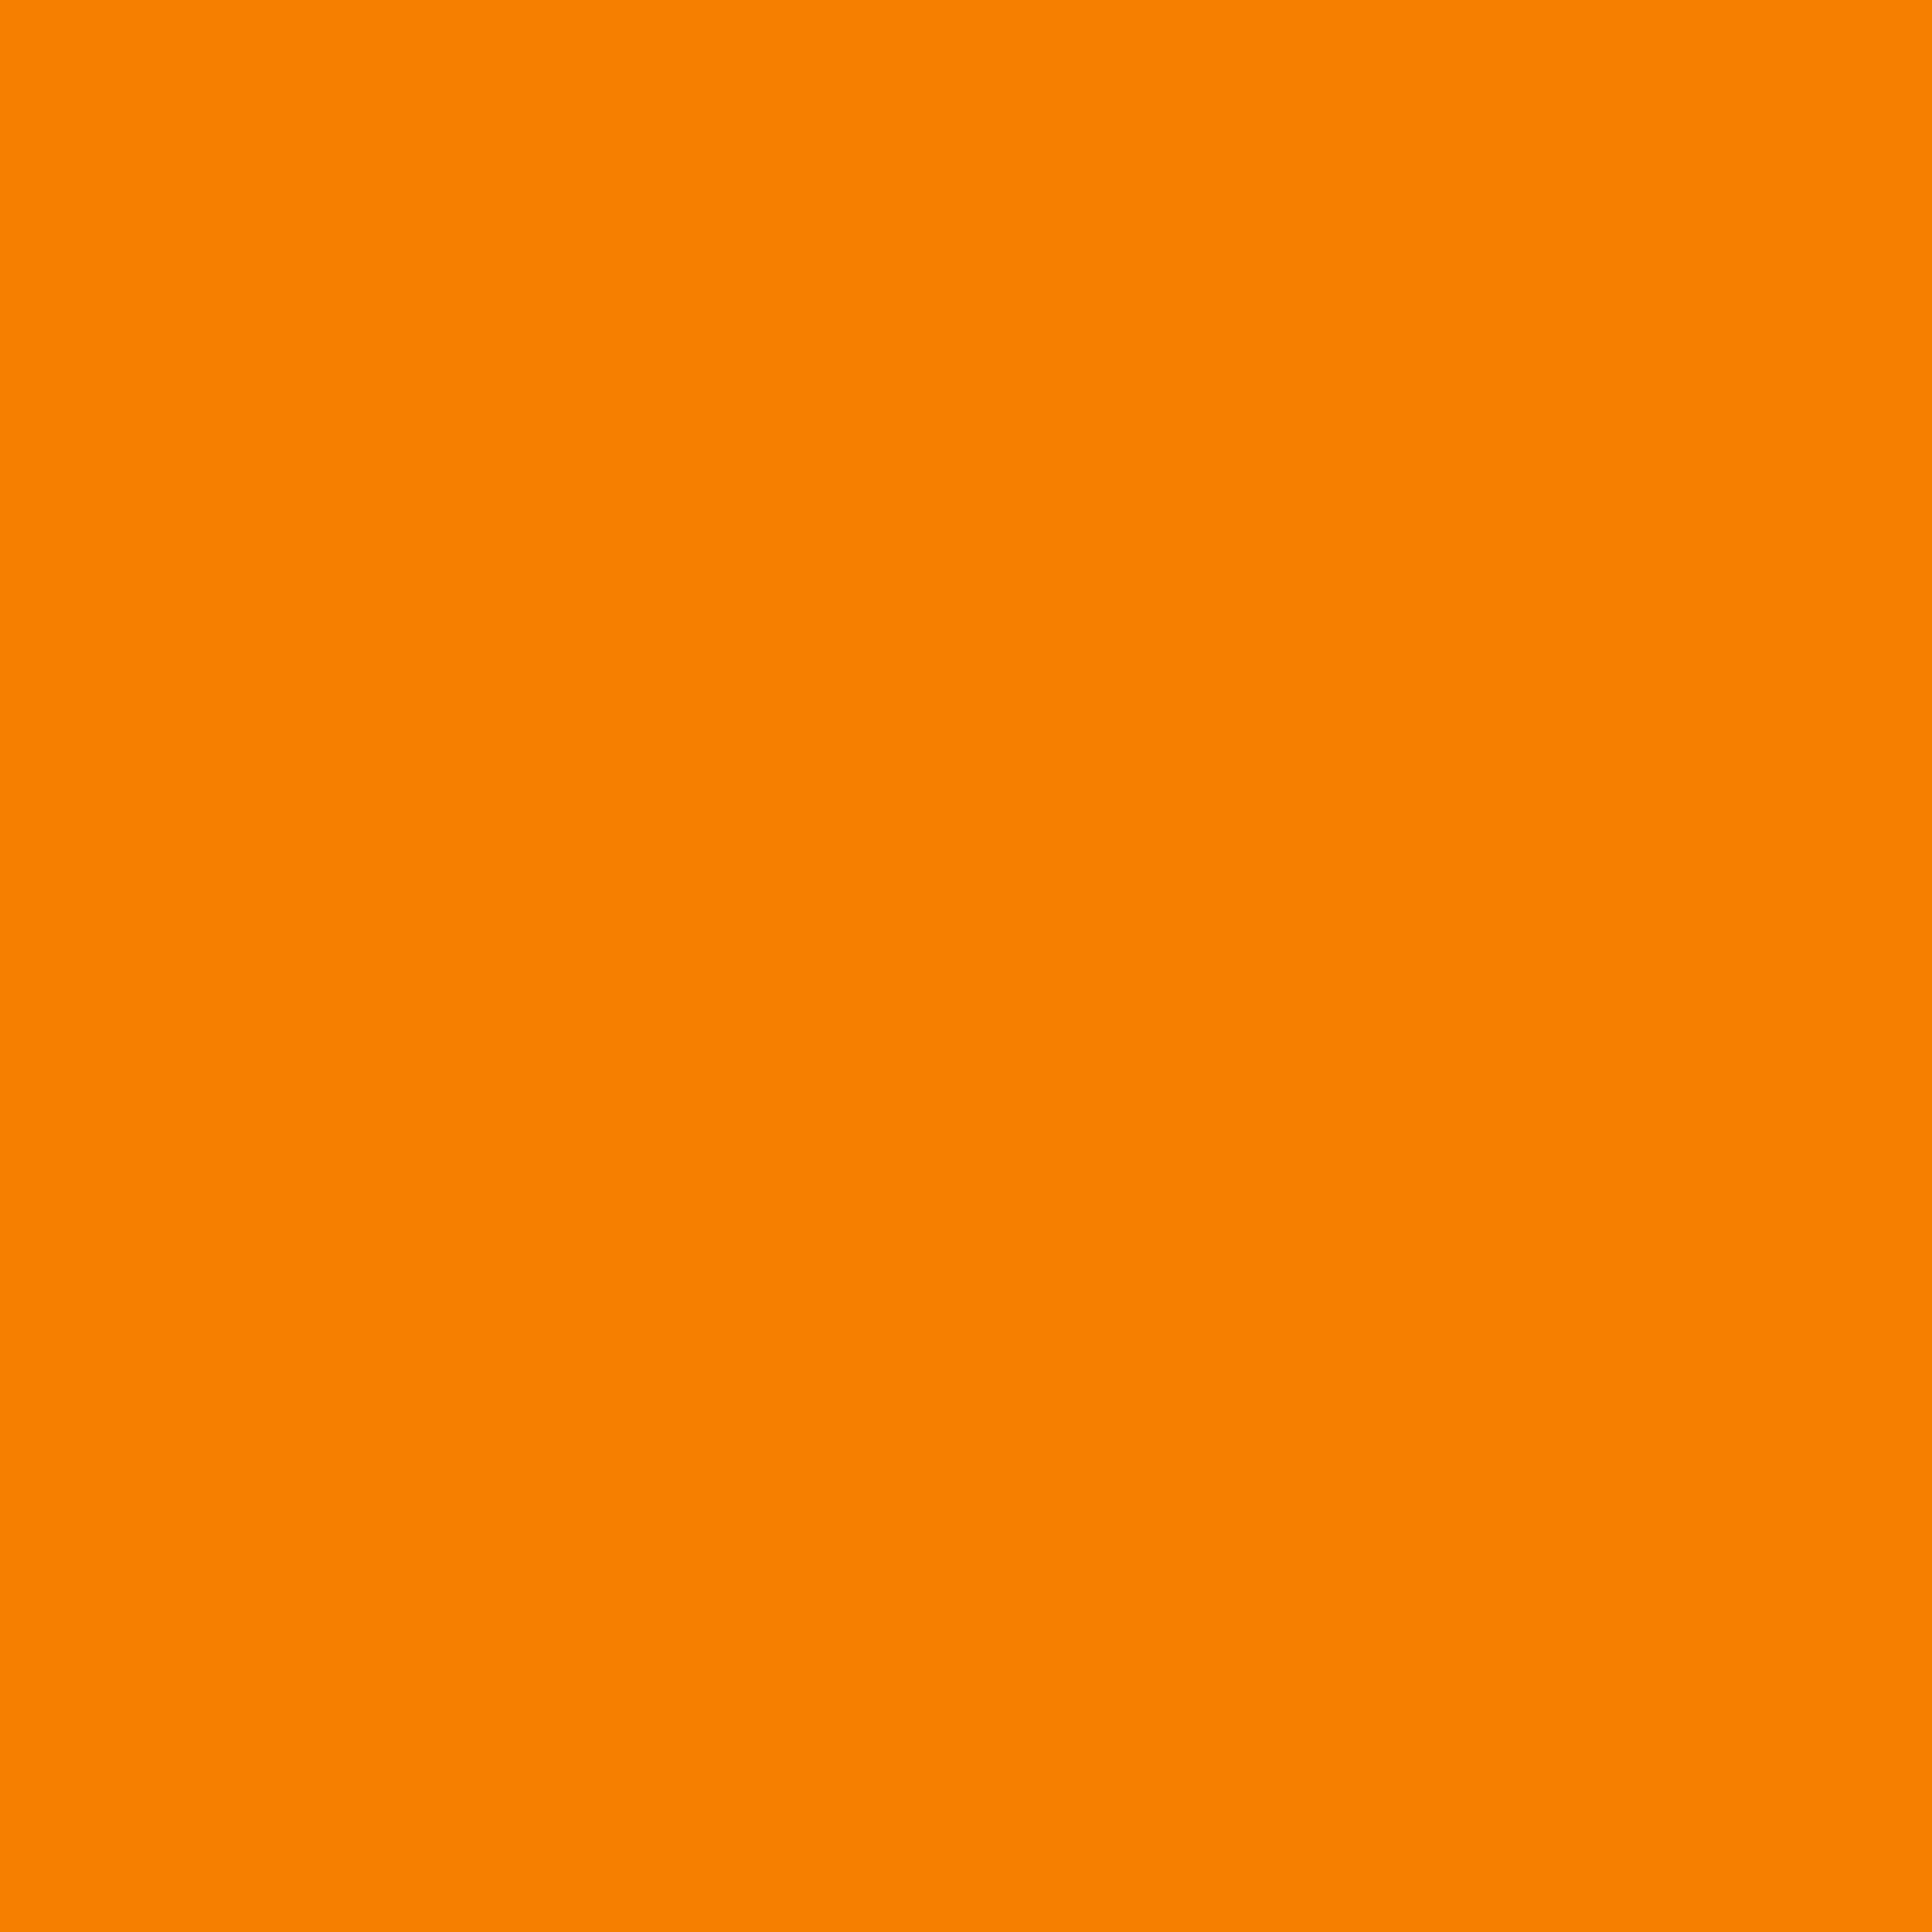 2732x2732 University Of Tennessee Orange Solid Color Background